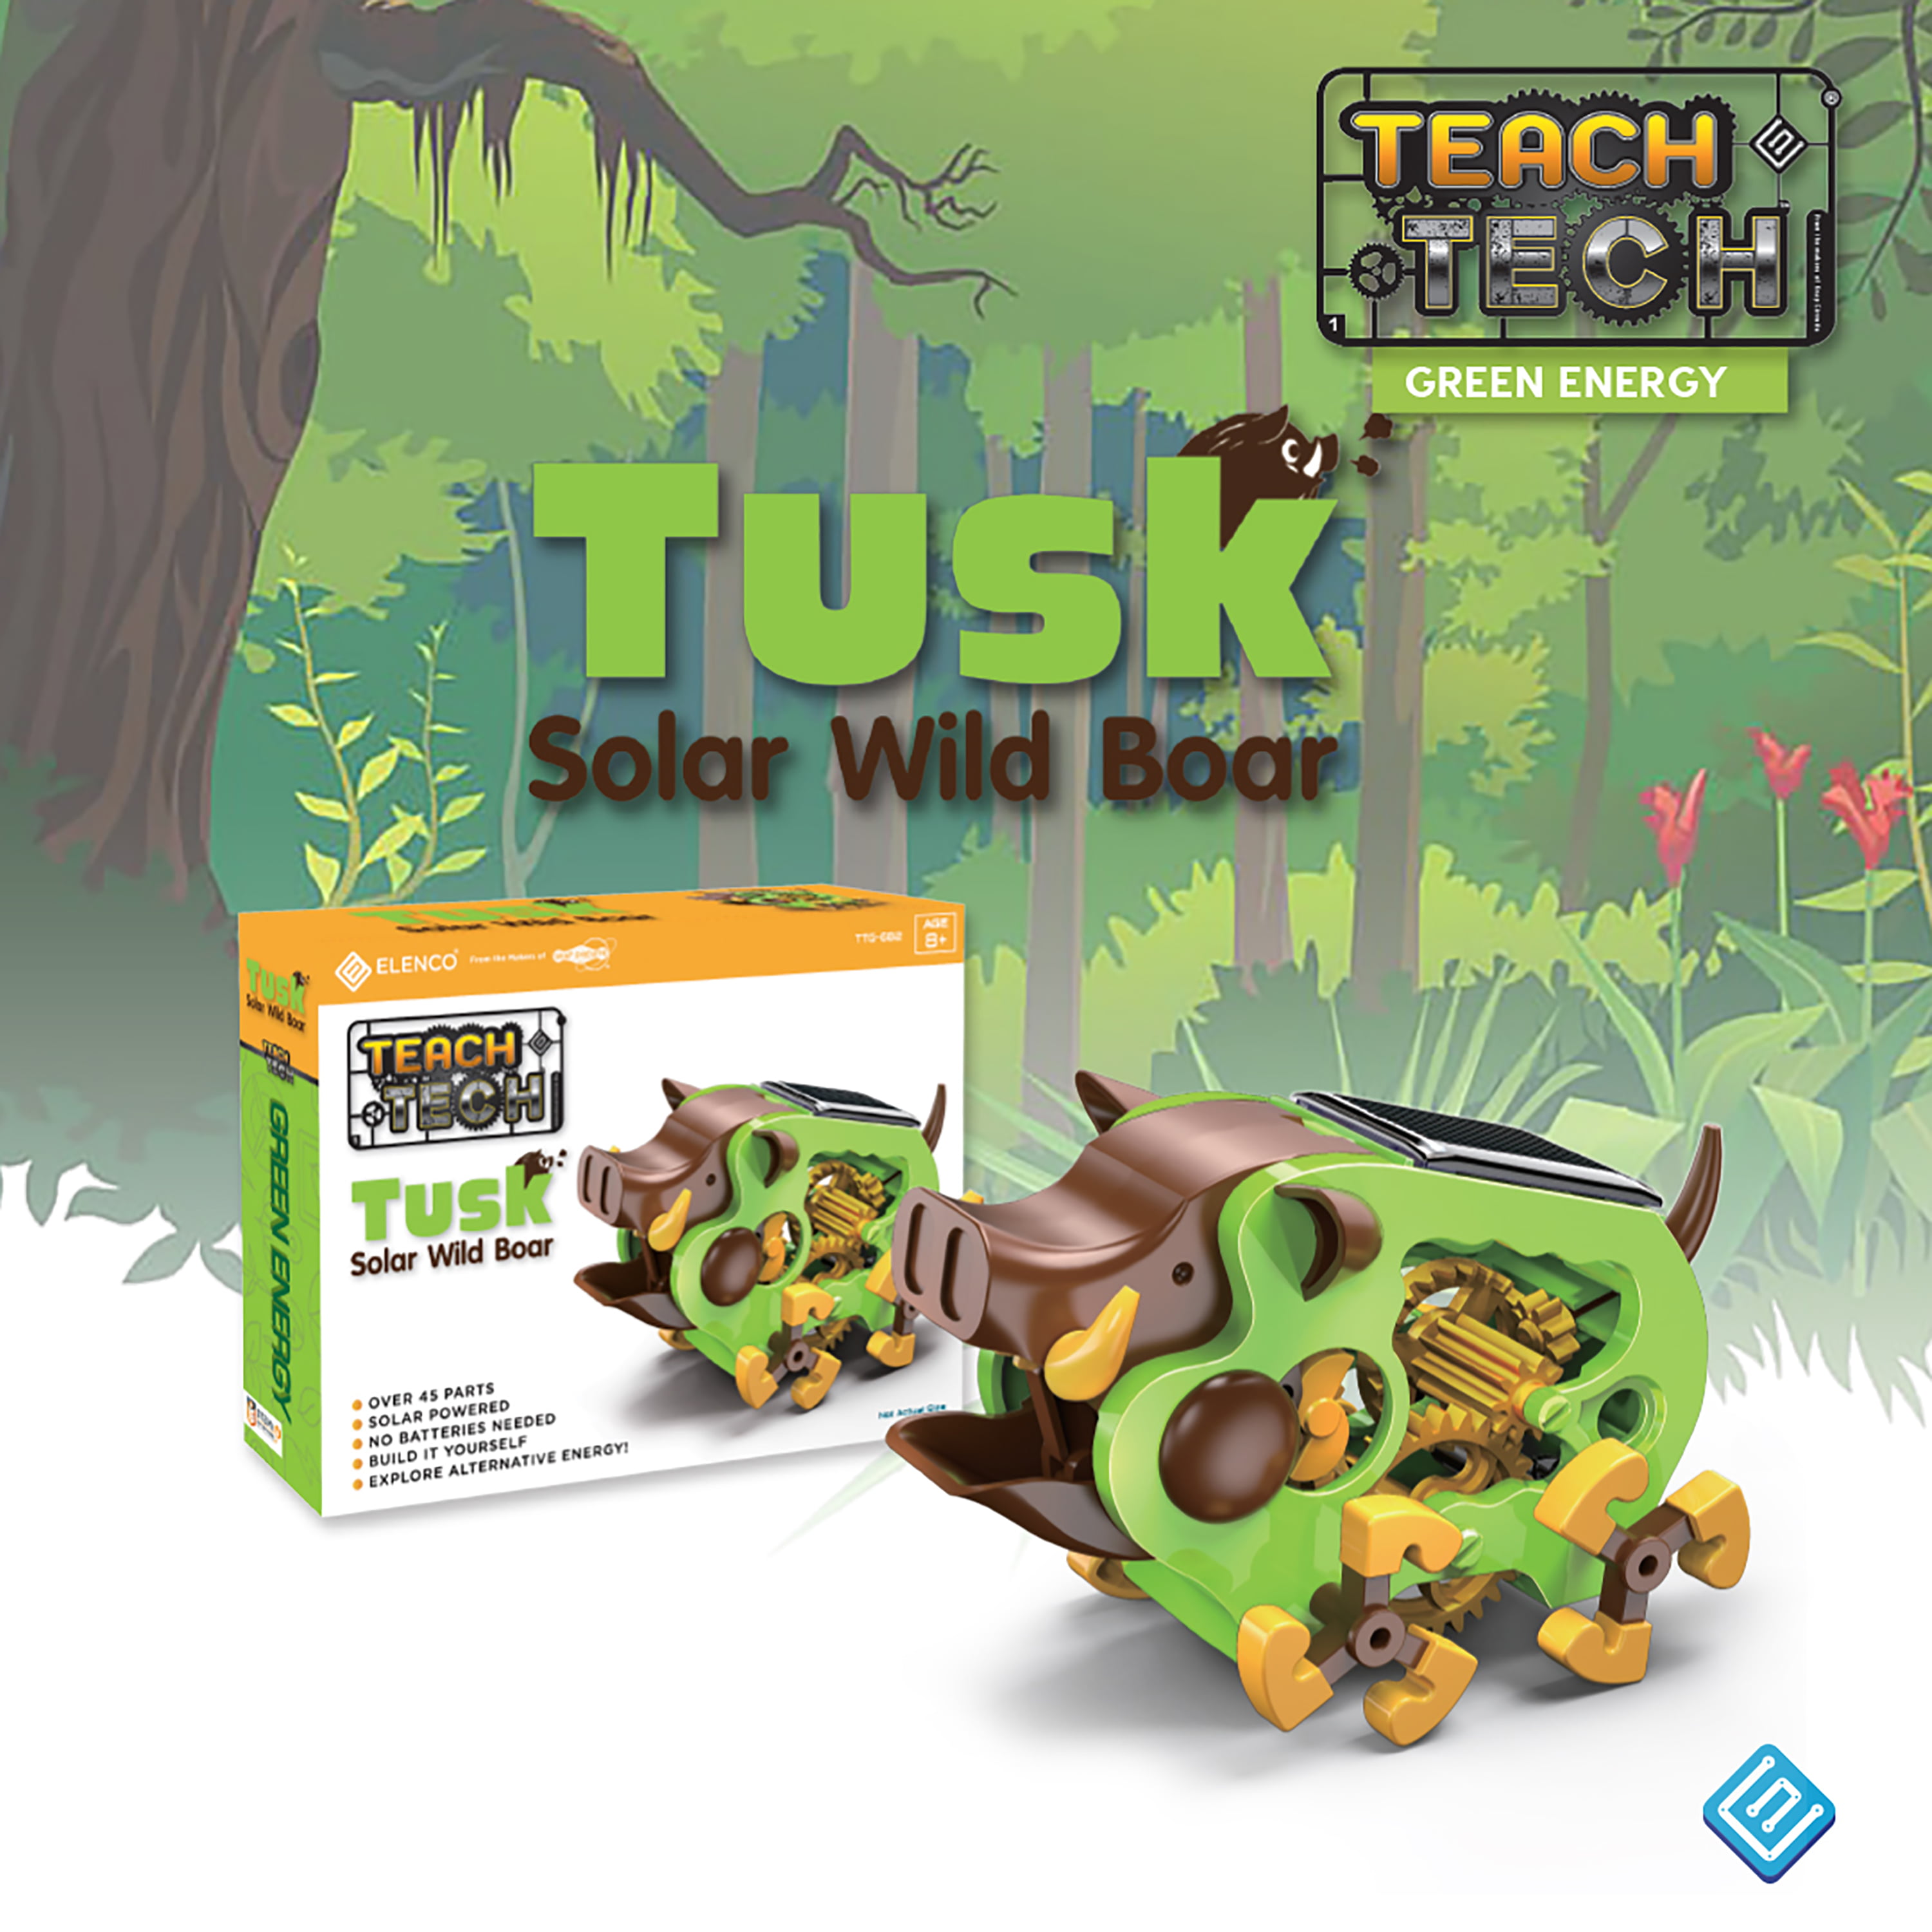 Solar Wild Boar Building Model Kit Ideal For a Do it yourself Science Fair Spring Workshop Project